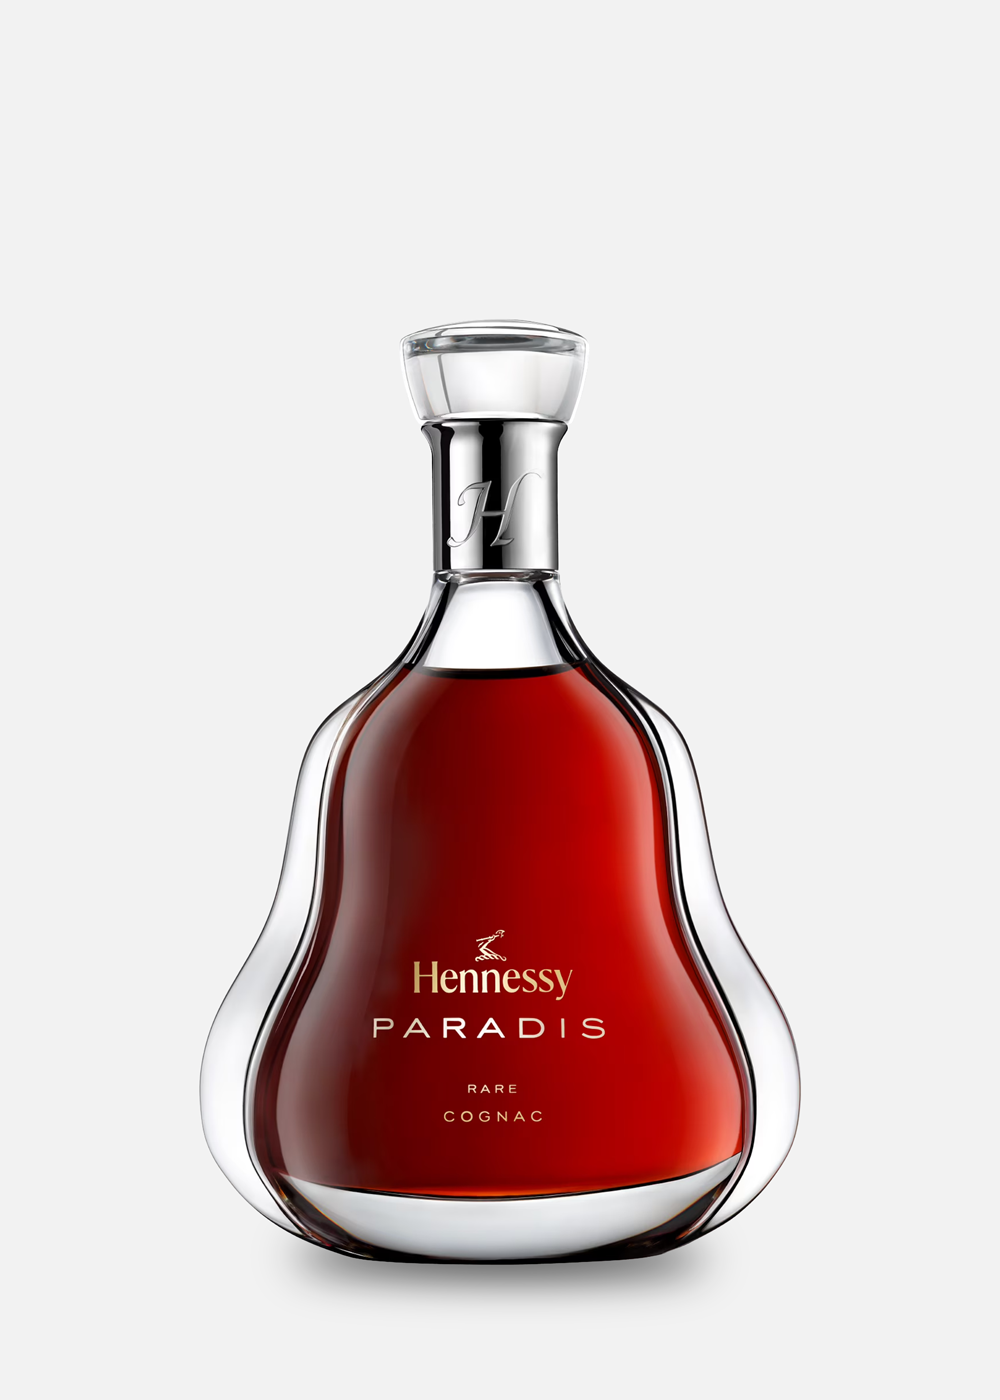 Hennessyparadis.png